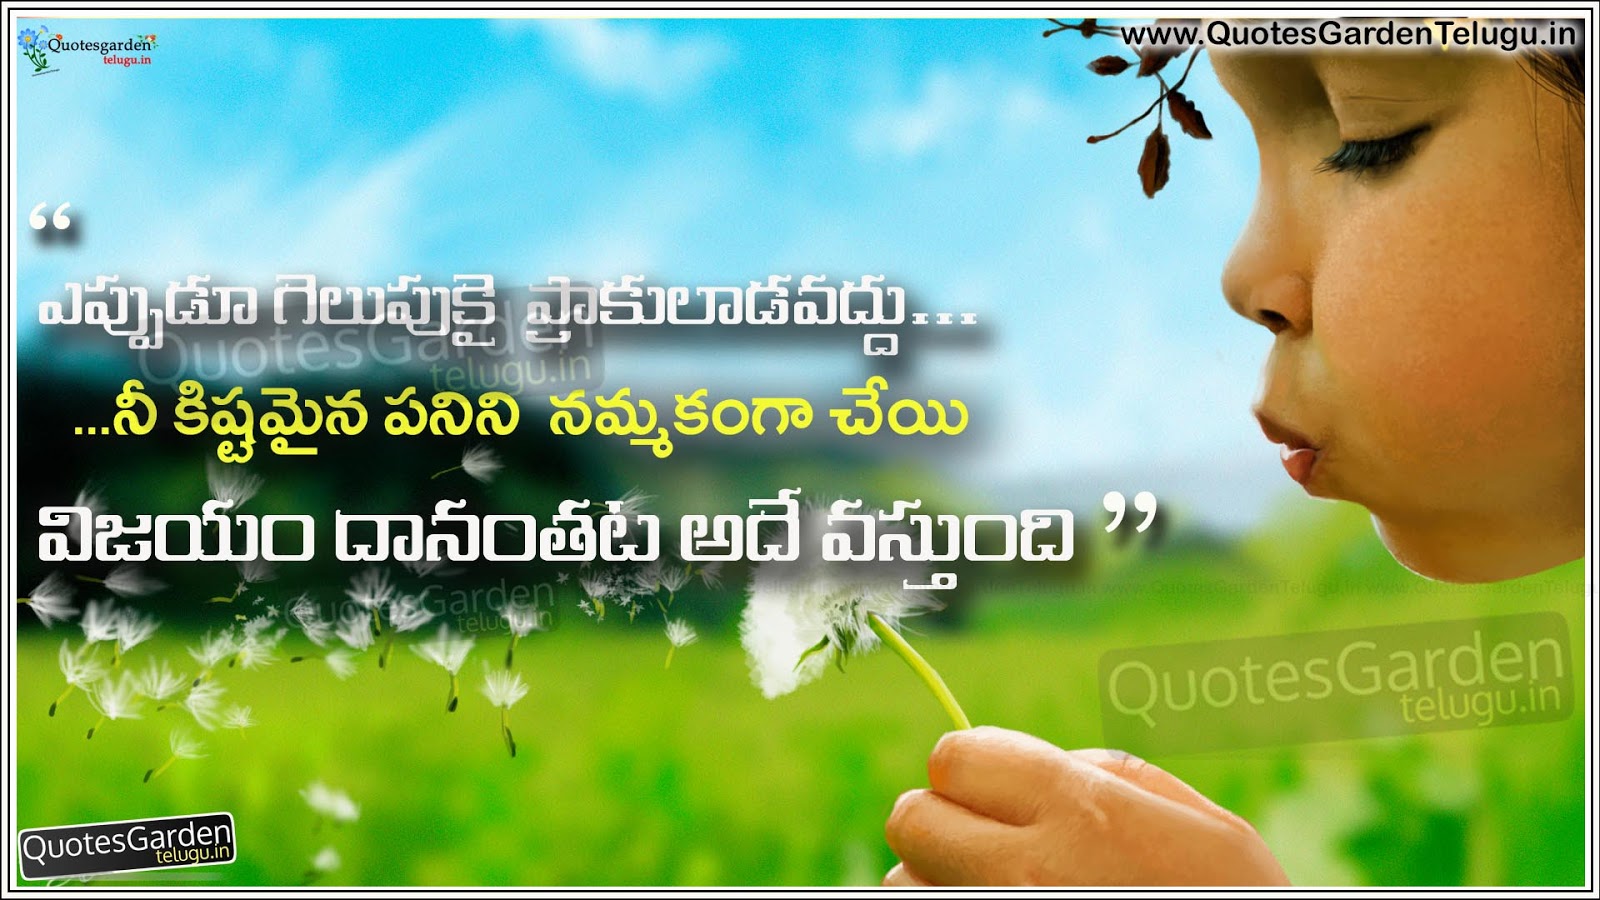 Good morning Nice telugu messages quotes wallpapers | QUOTES GARDEN TELUGU  | Telugu Quotes | English Quotes | Hindi Quotes |